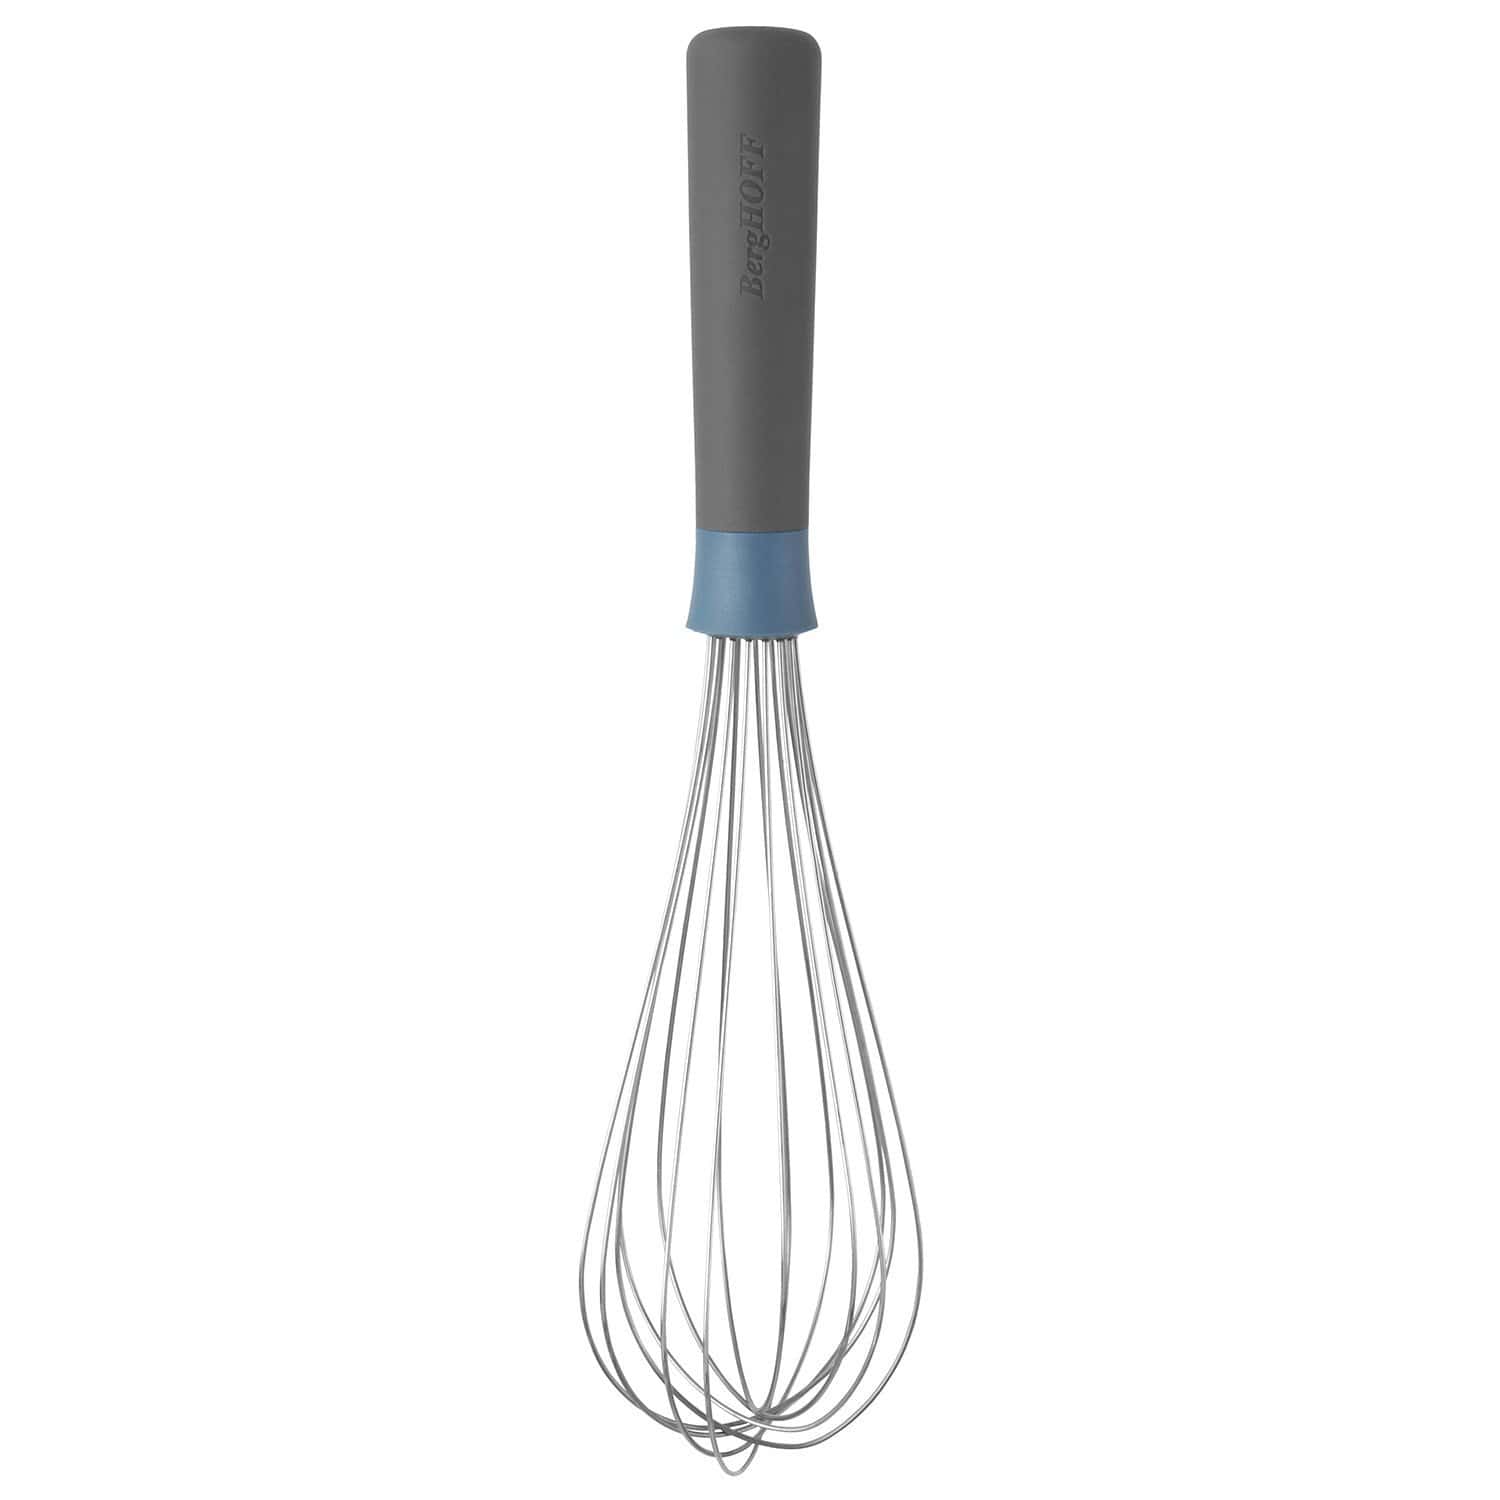 BergHOFF Leo Whisk with PP Handle - Black - 3950016 - Jashanmal Home